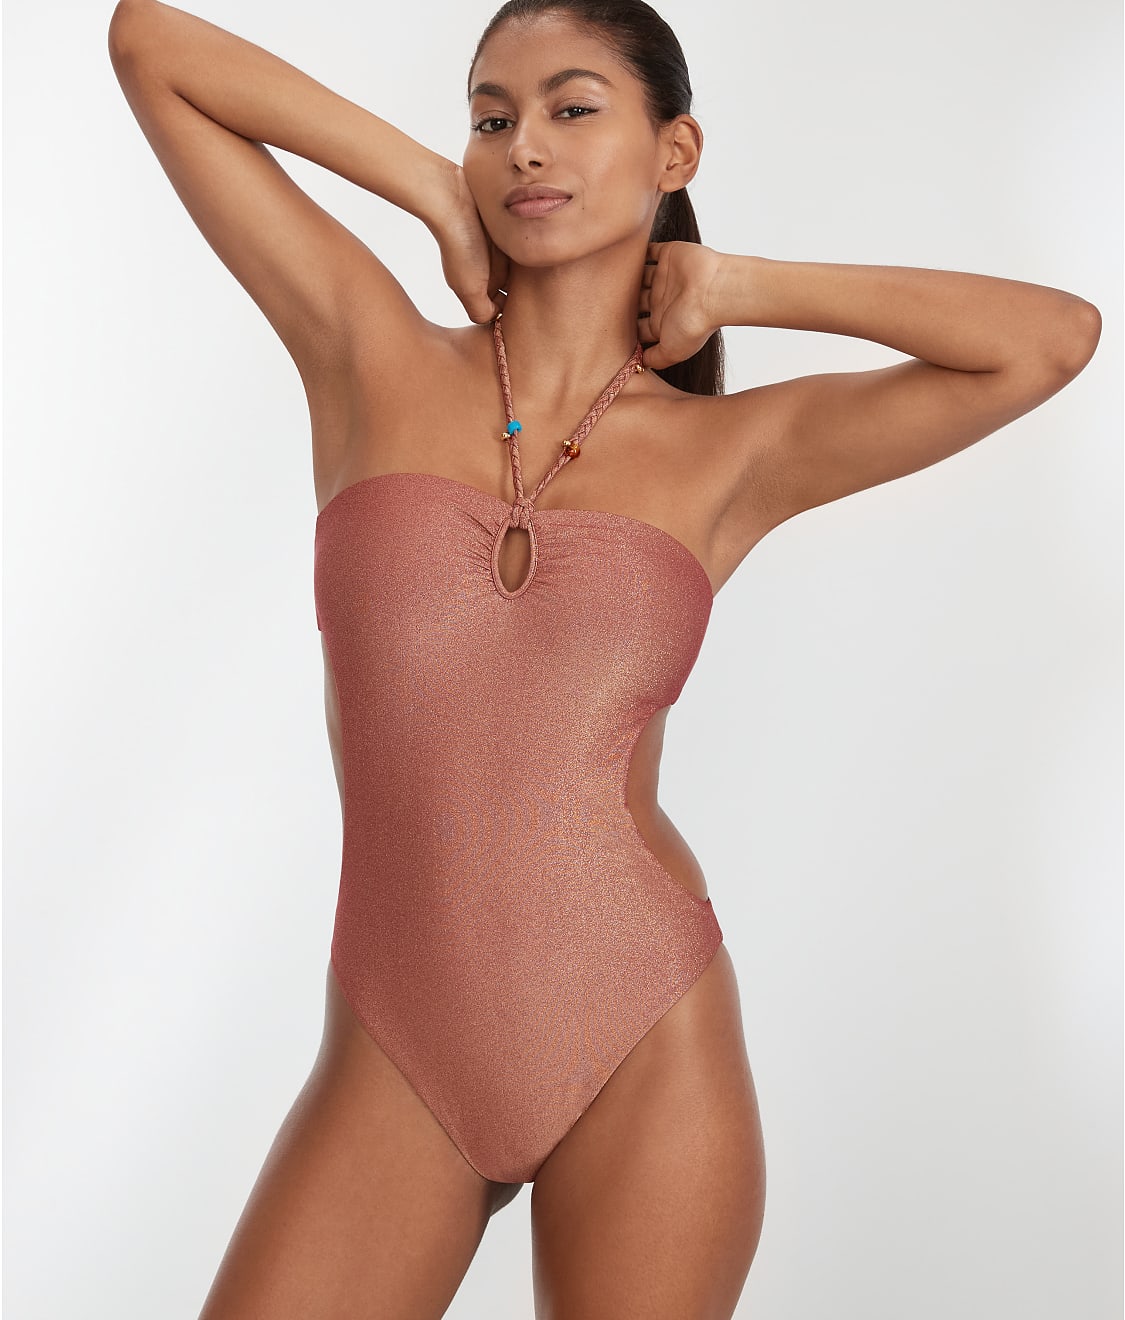 SPANX High-Waisted Body Tunic Shapewear in Rose Gold, Size Small